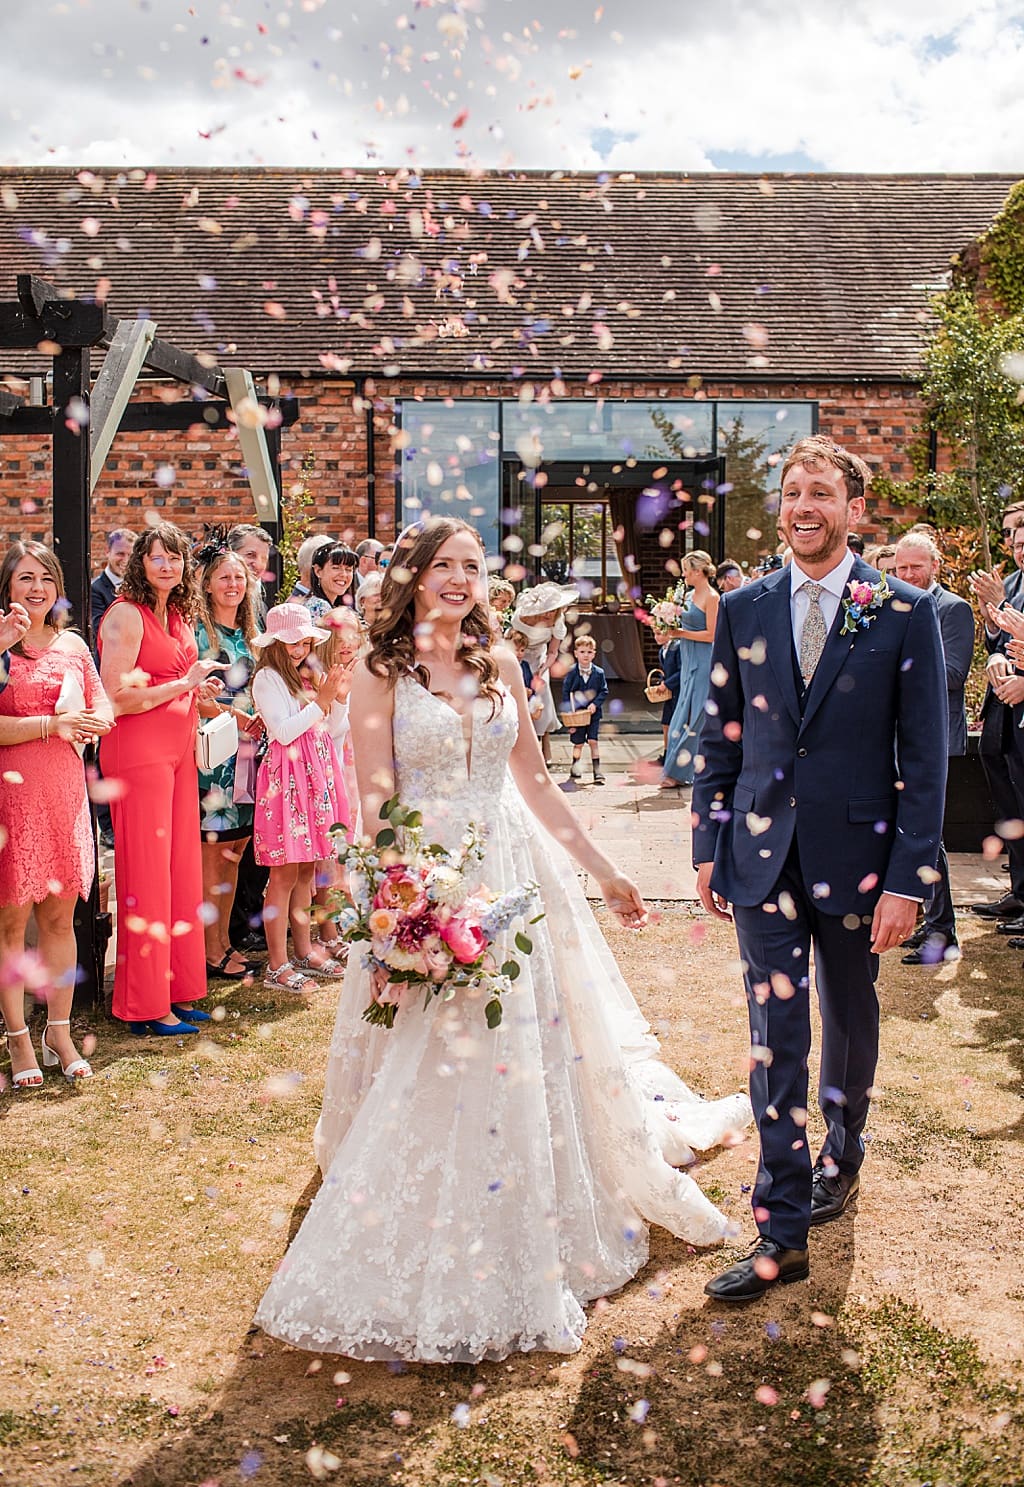 confetti being thrown in the gardens at Curradine Barns